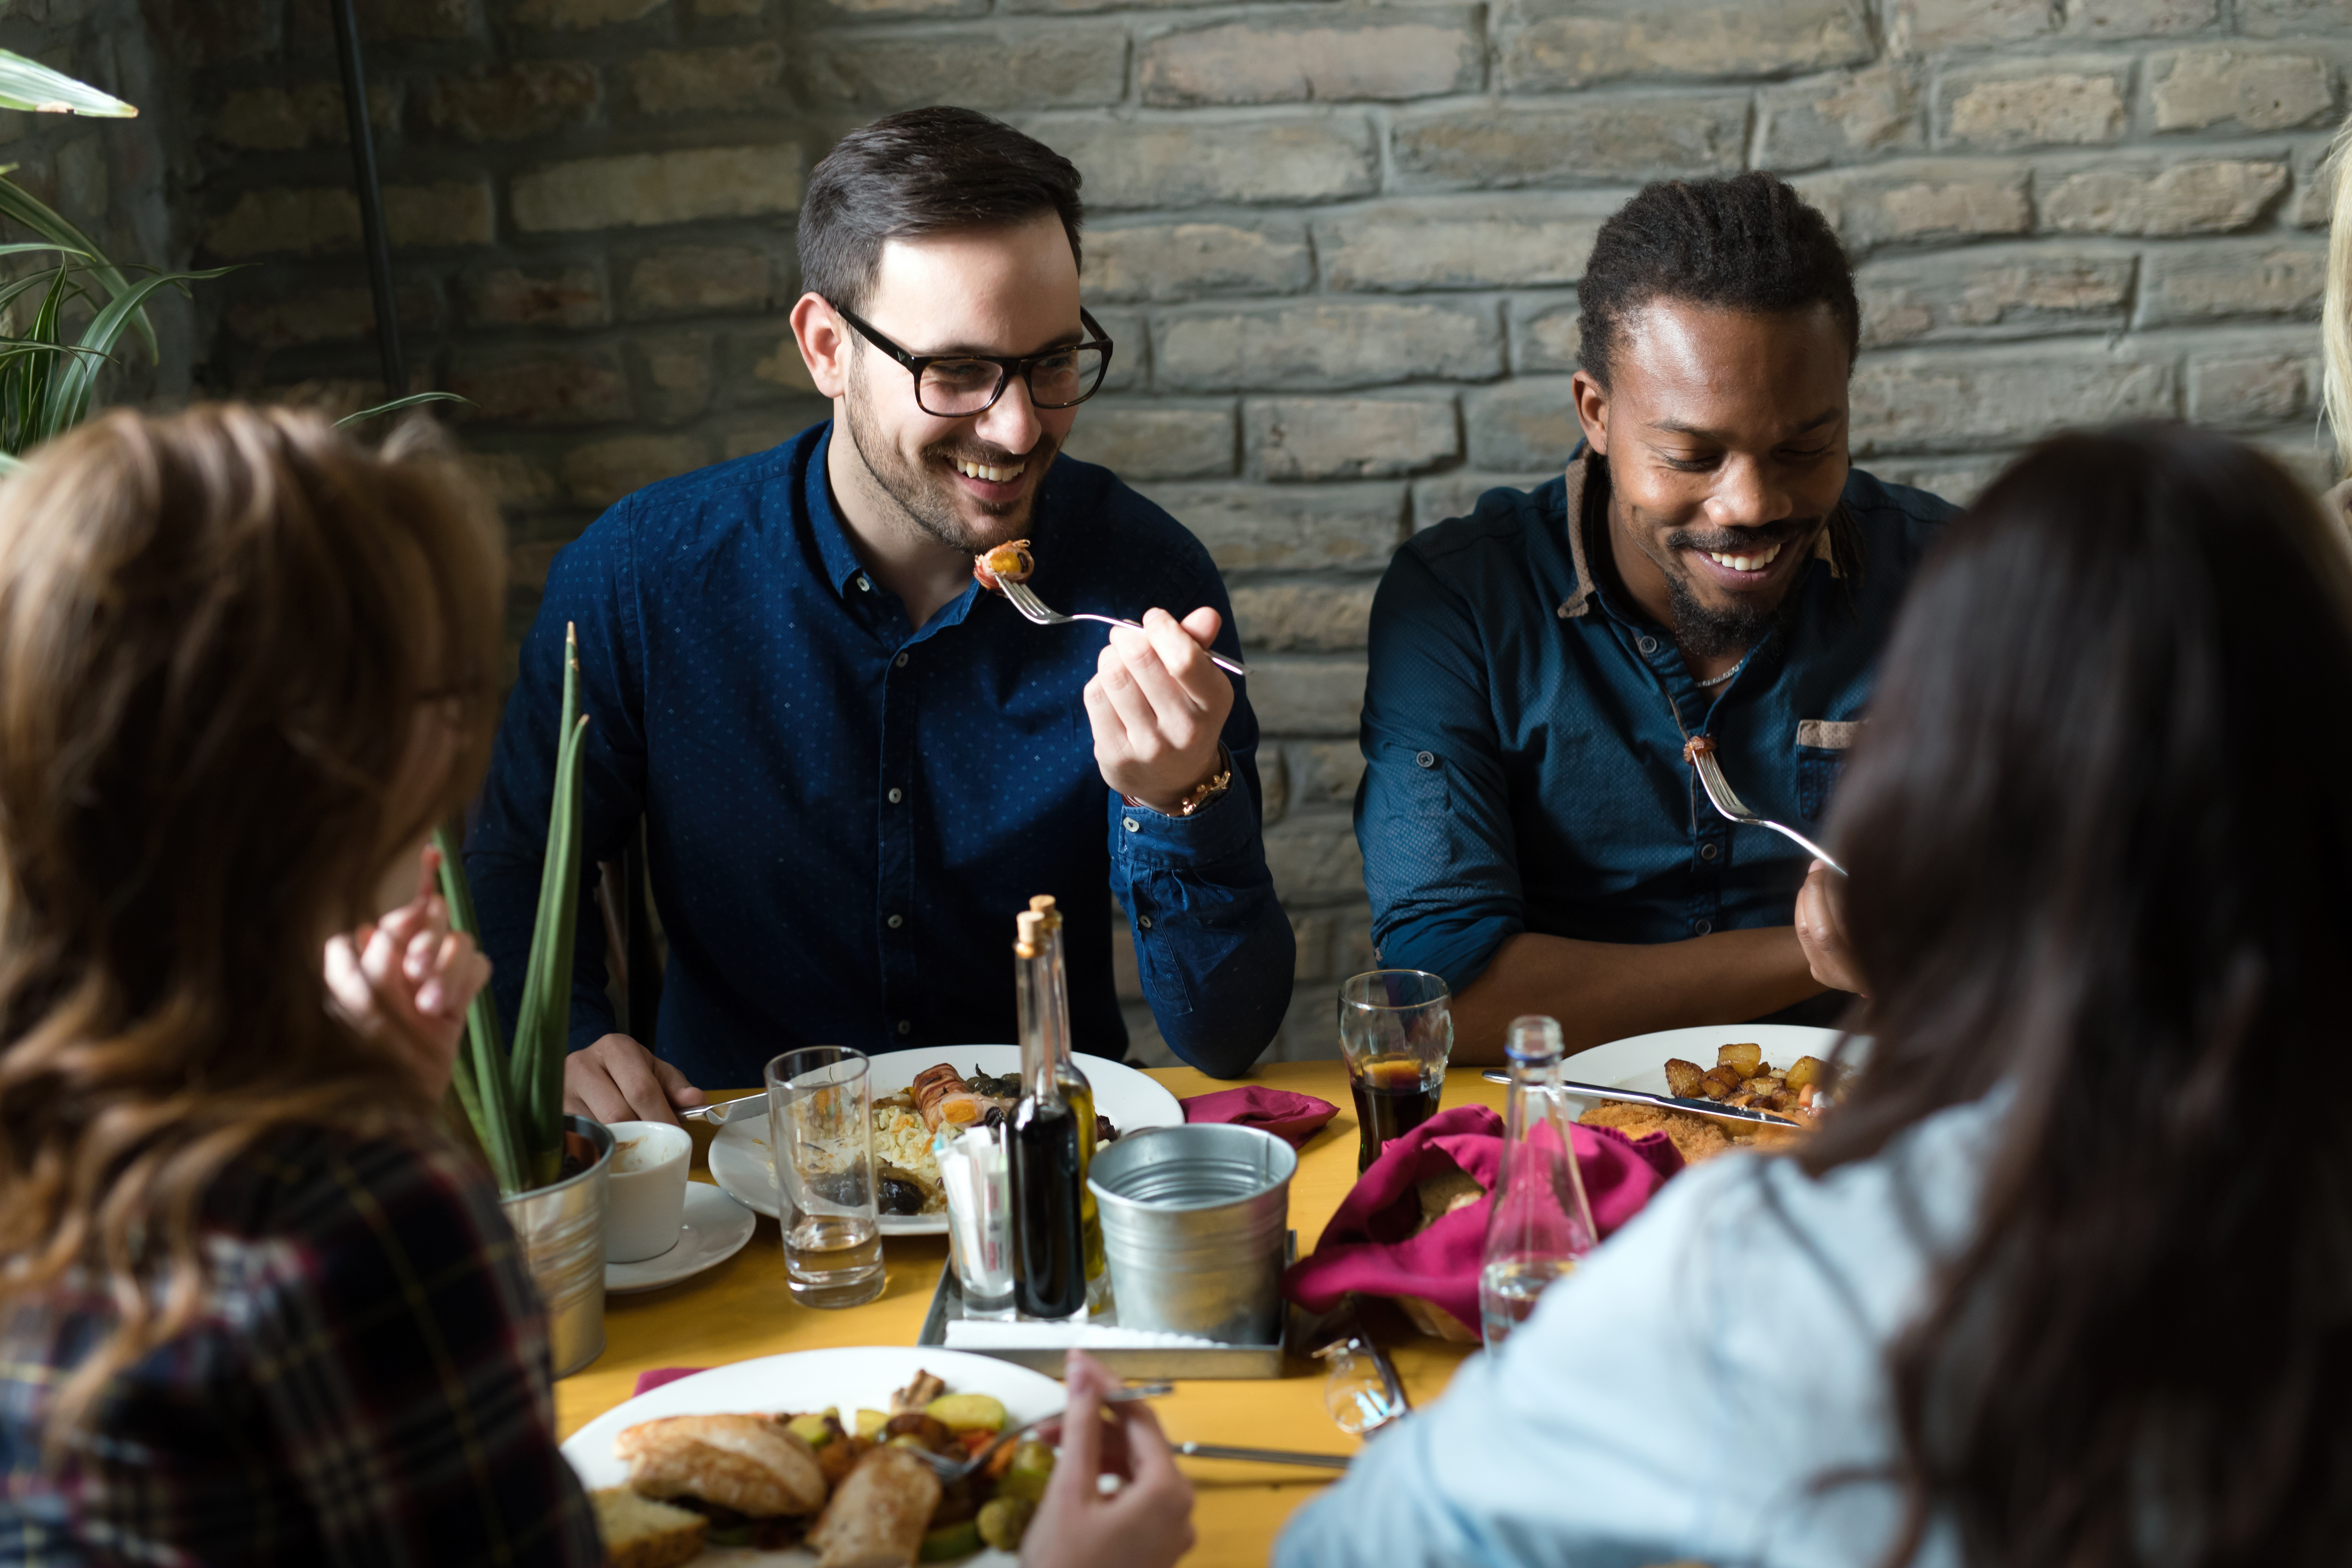 Canva - Group of happy business people eating together in restaurant